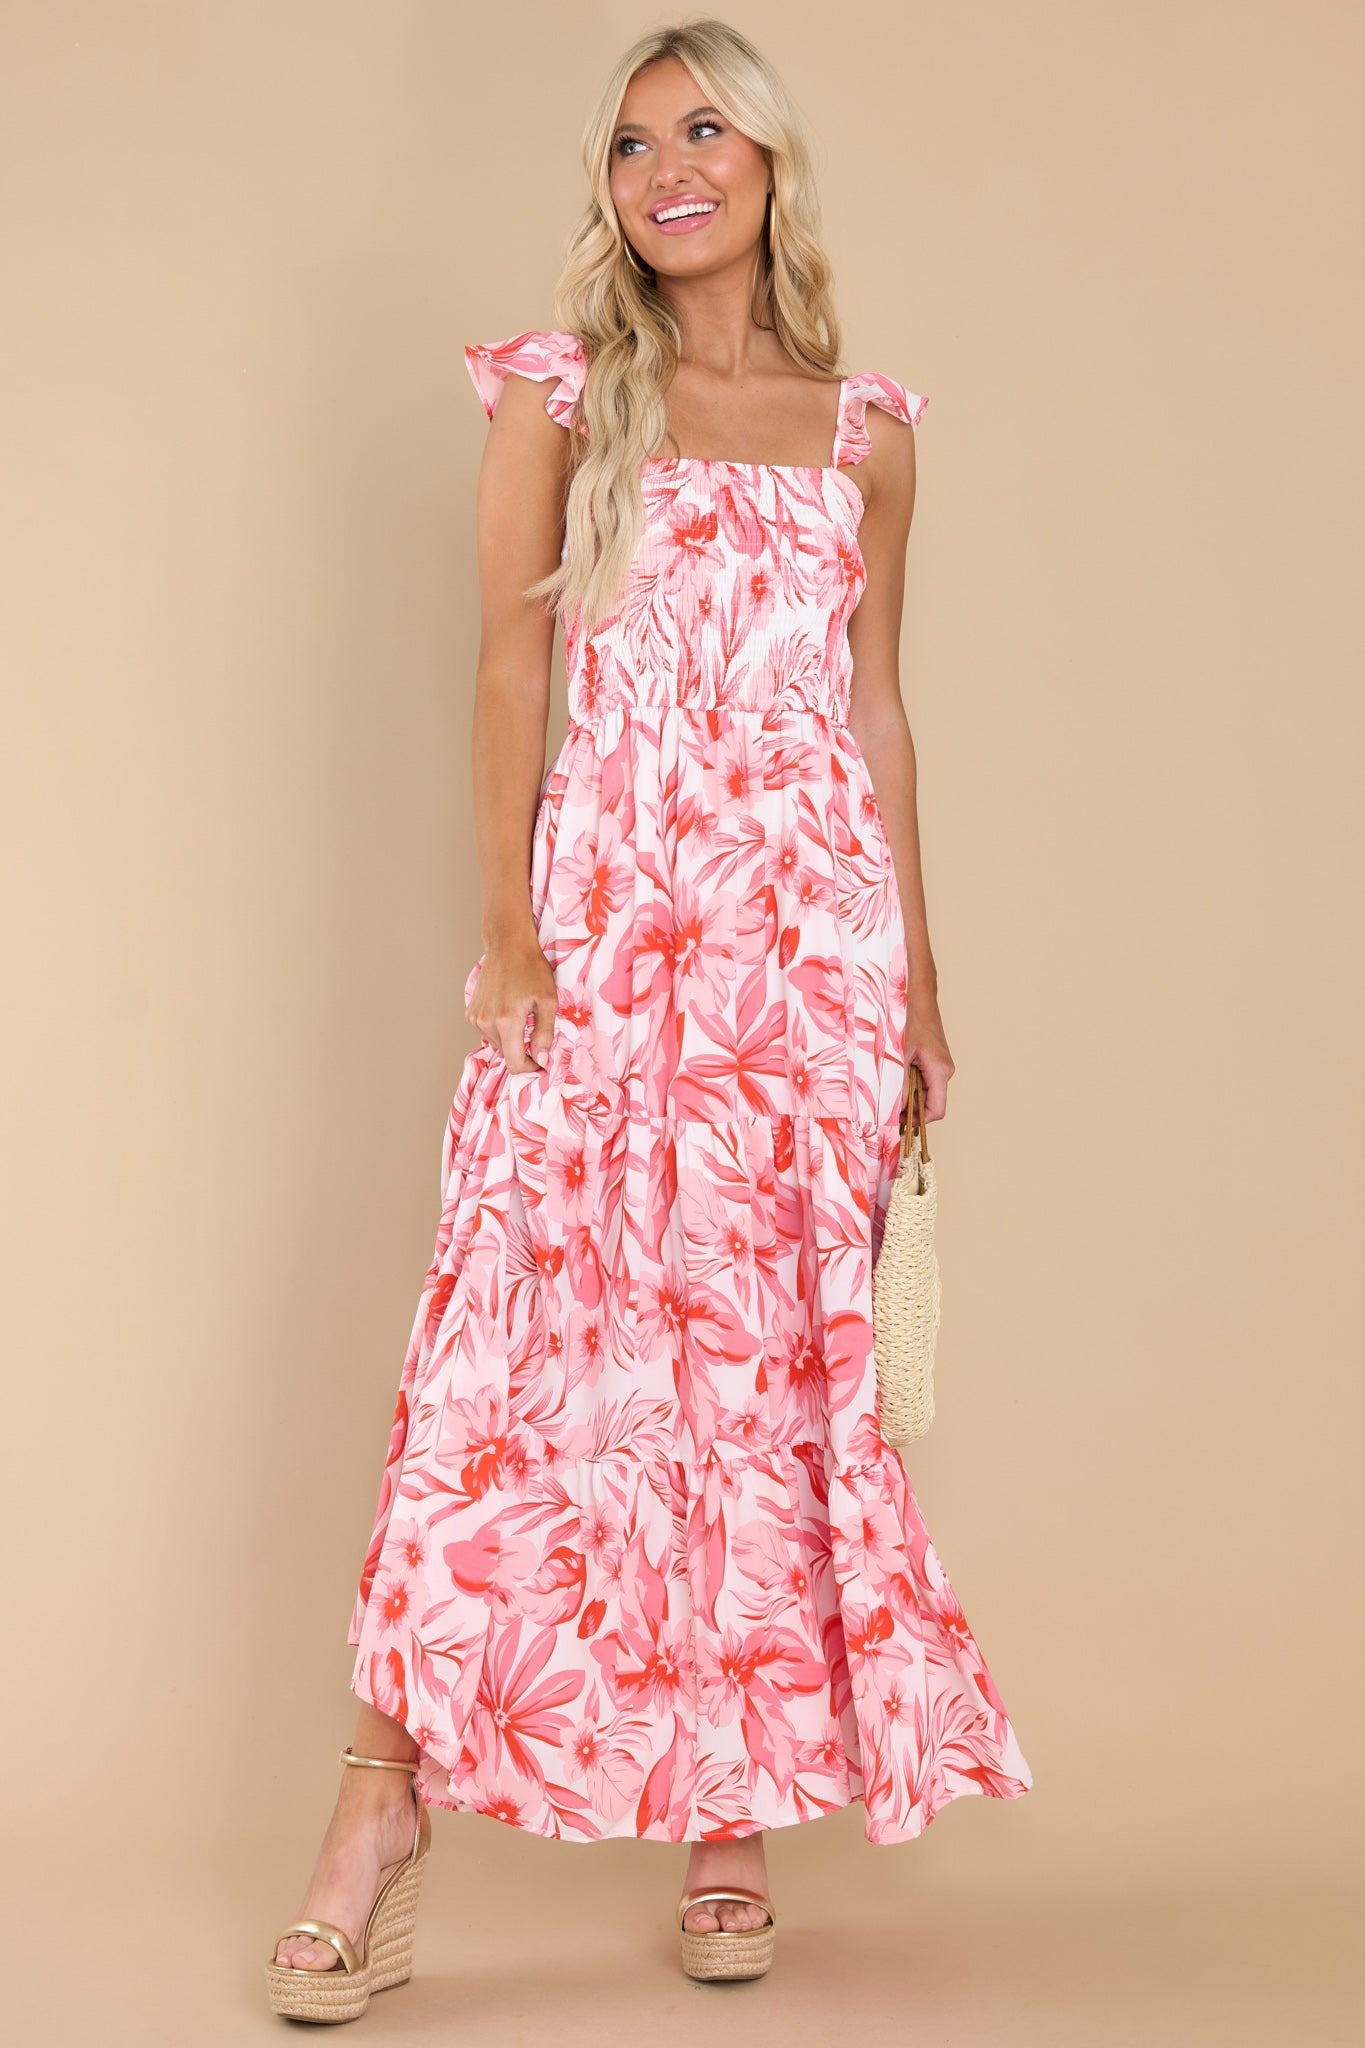 Sunset Sway Pink Dress - Red Dress